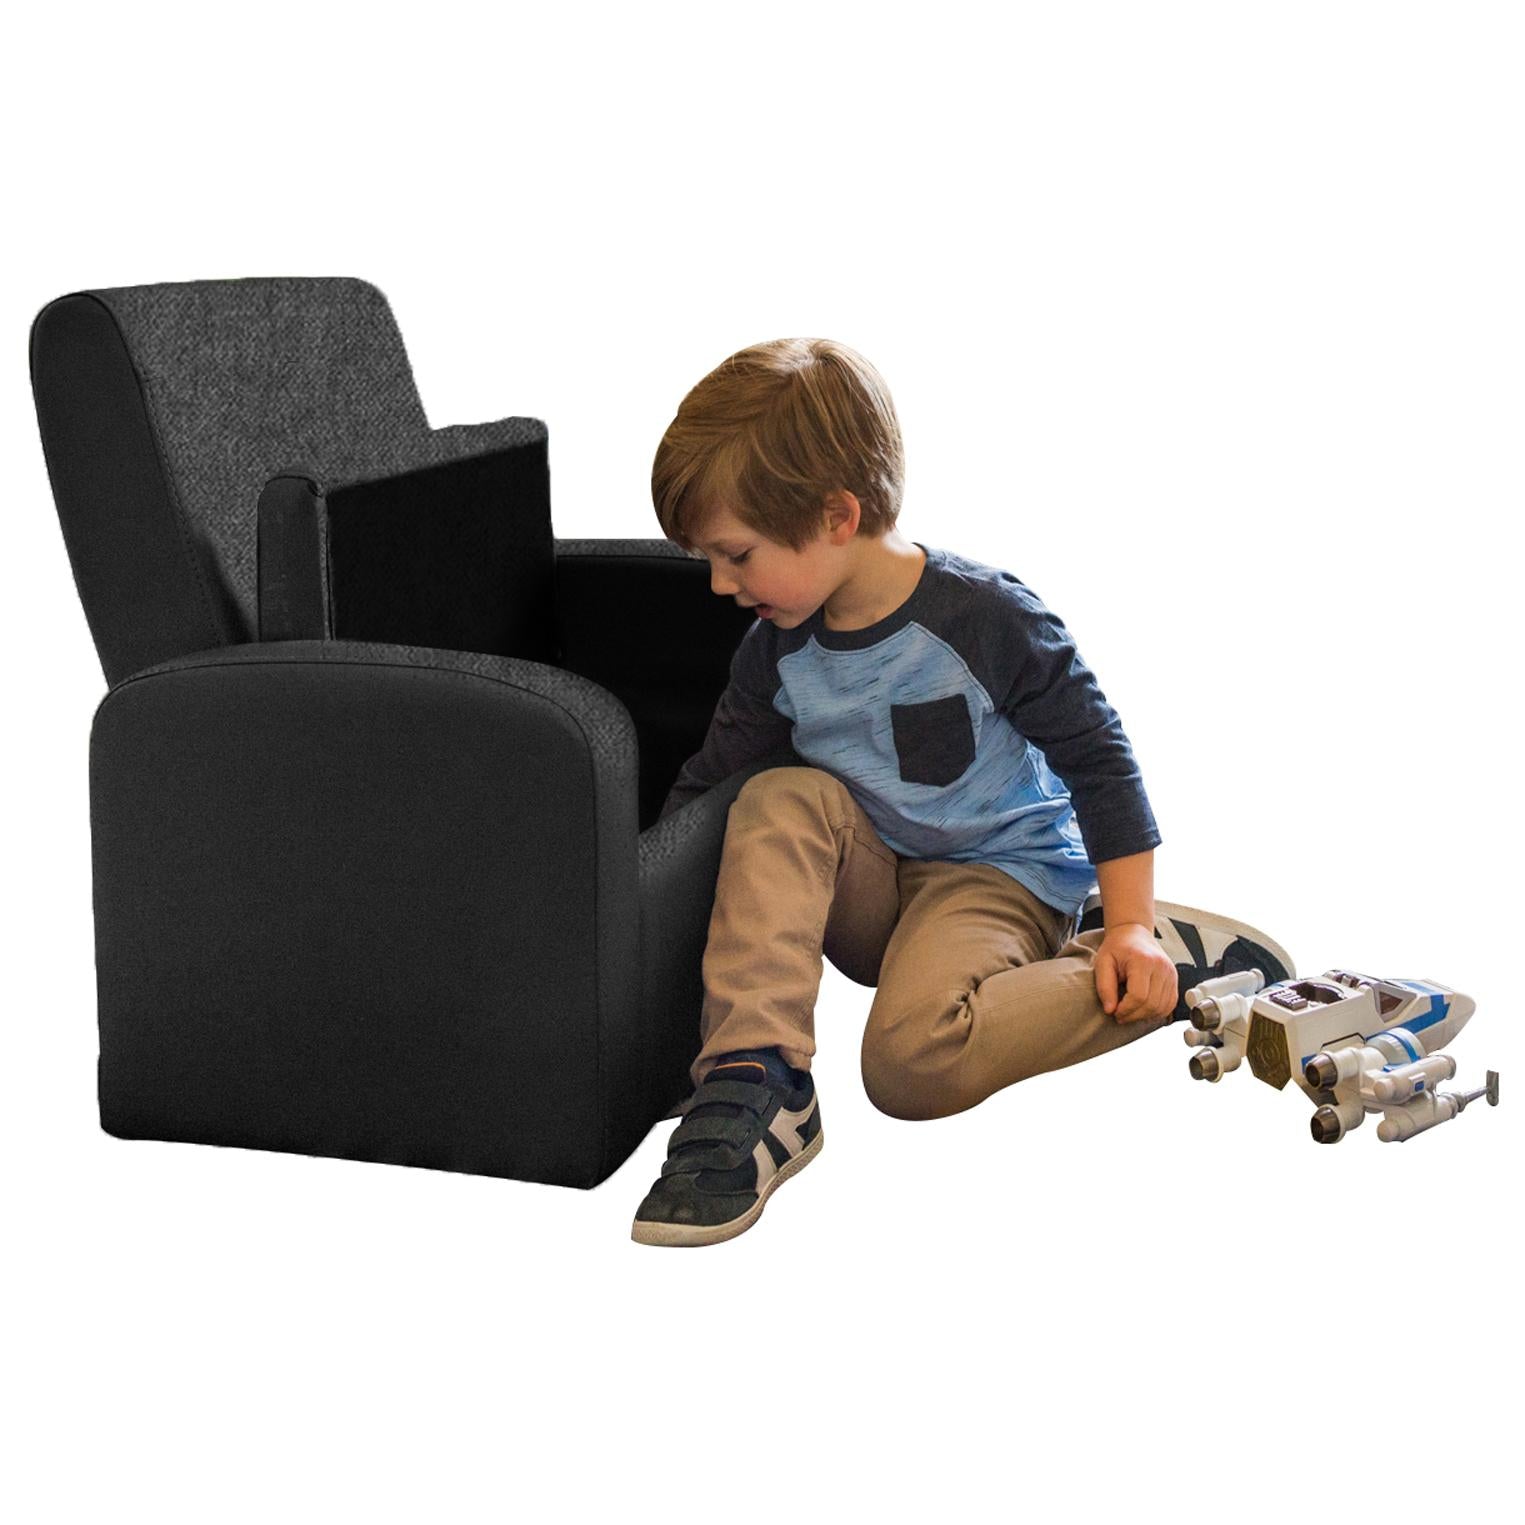 Kids Black Comfy Upholstered Recliner Chair with Storage Default Title